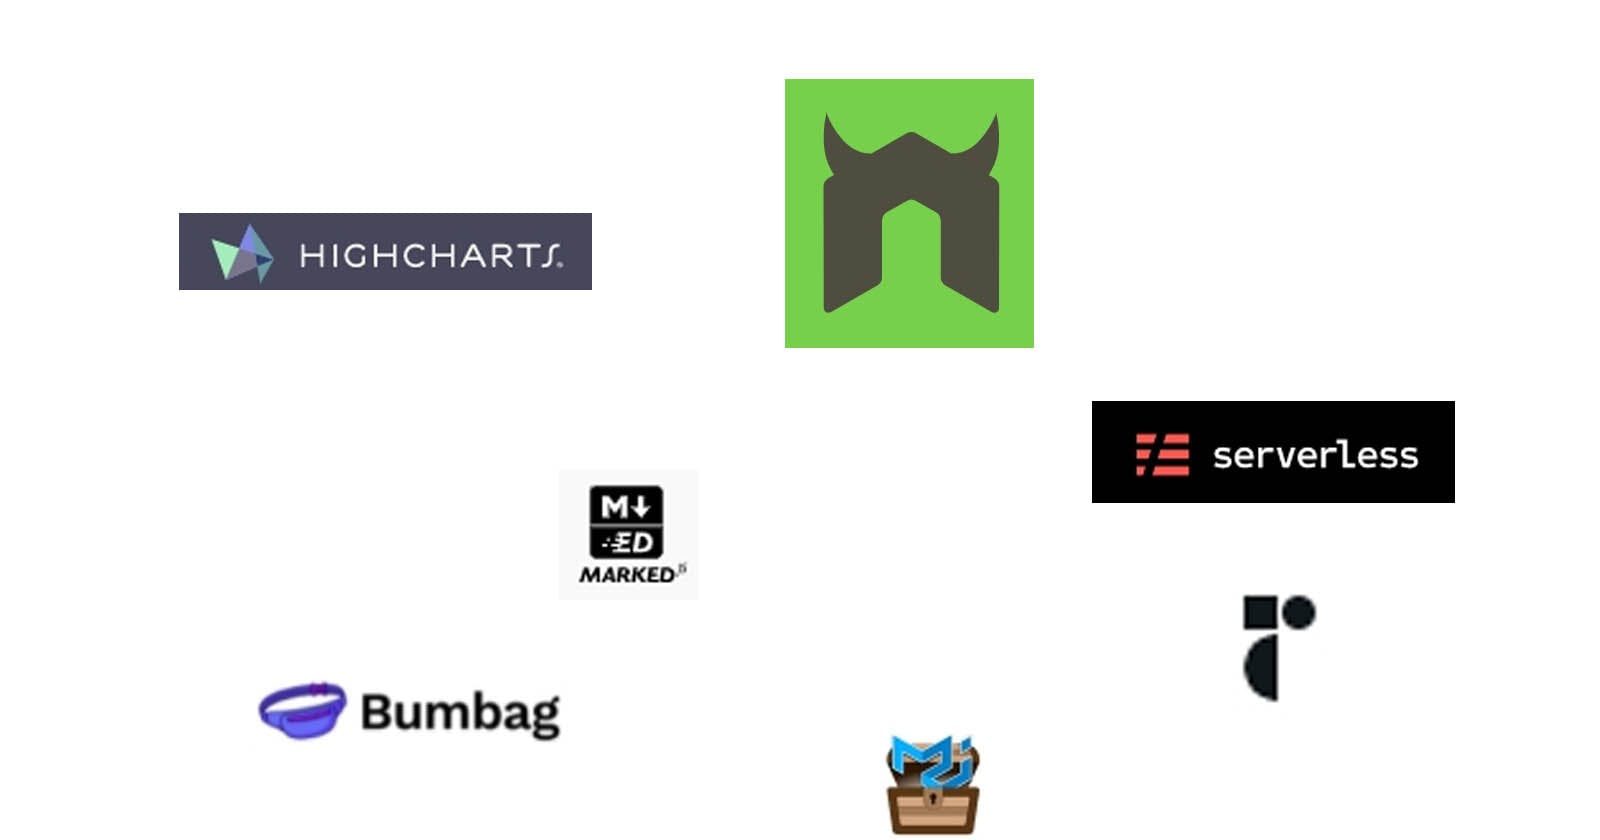 🚀10 Trending projects on GitHub for web developers - 6th August 2021